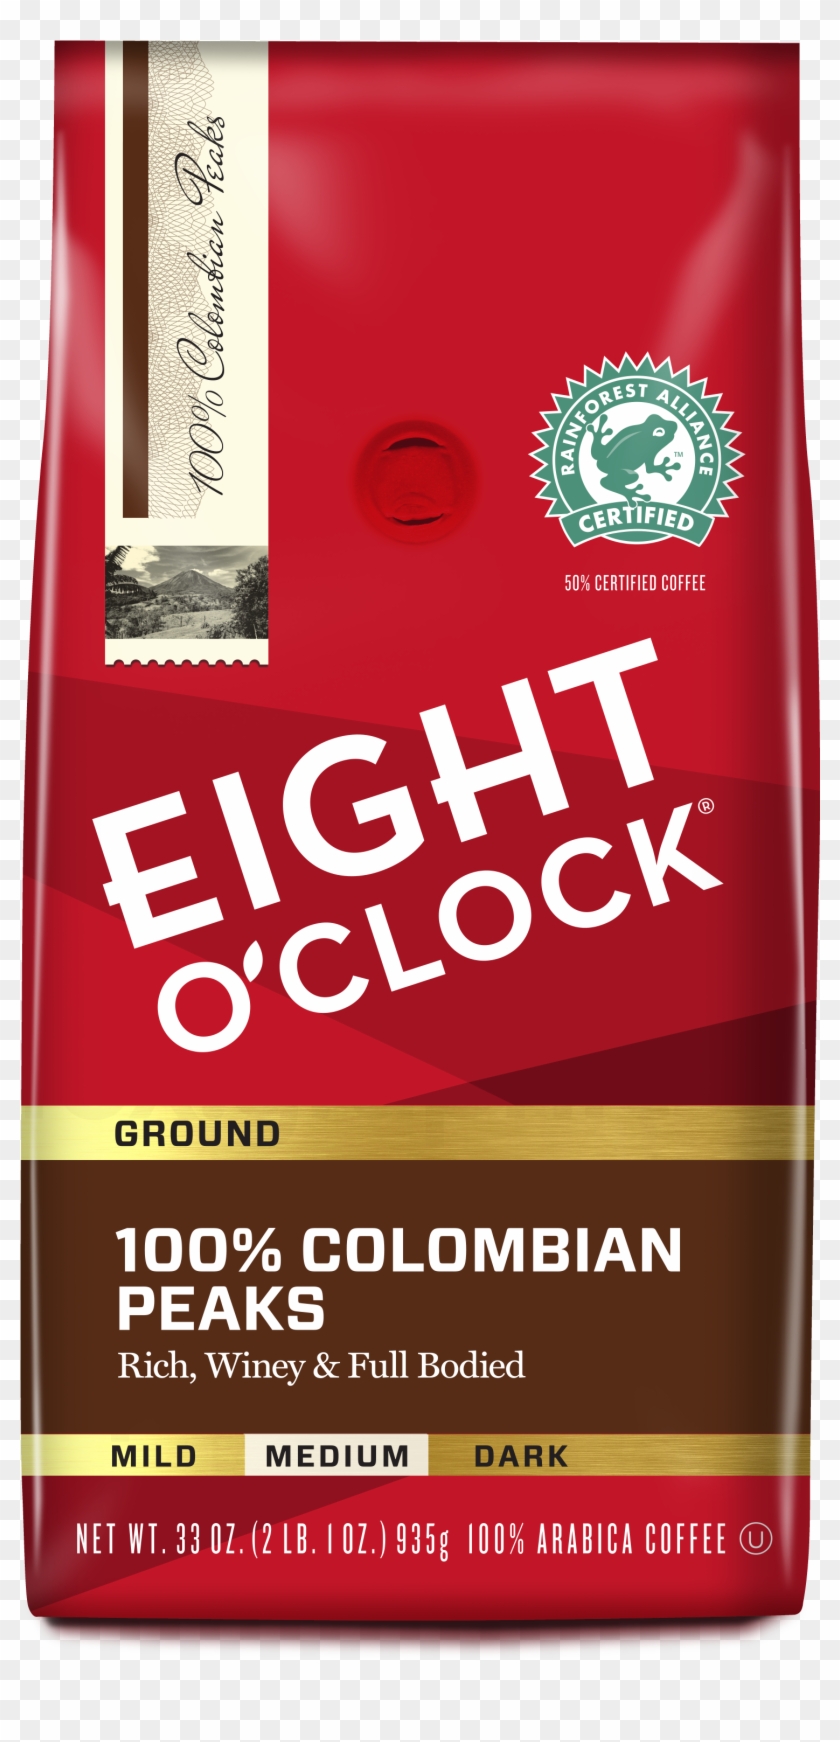 Eight O'clock 100% Colombian Peaks Ground Coffee 33 - Packaging And Labeling Clipart #2056737